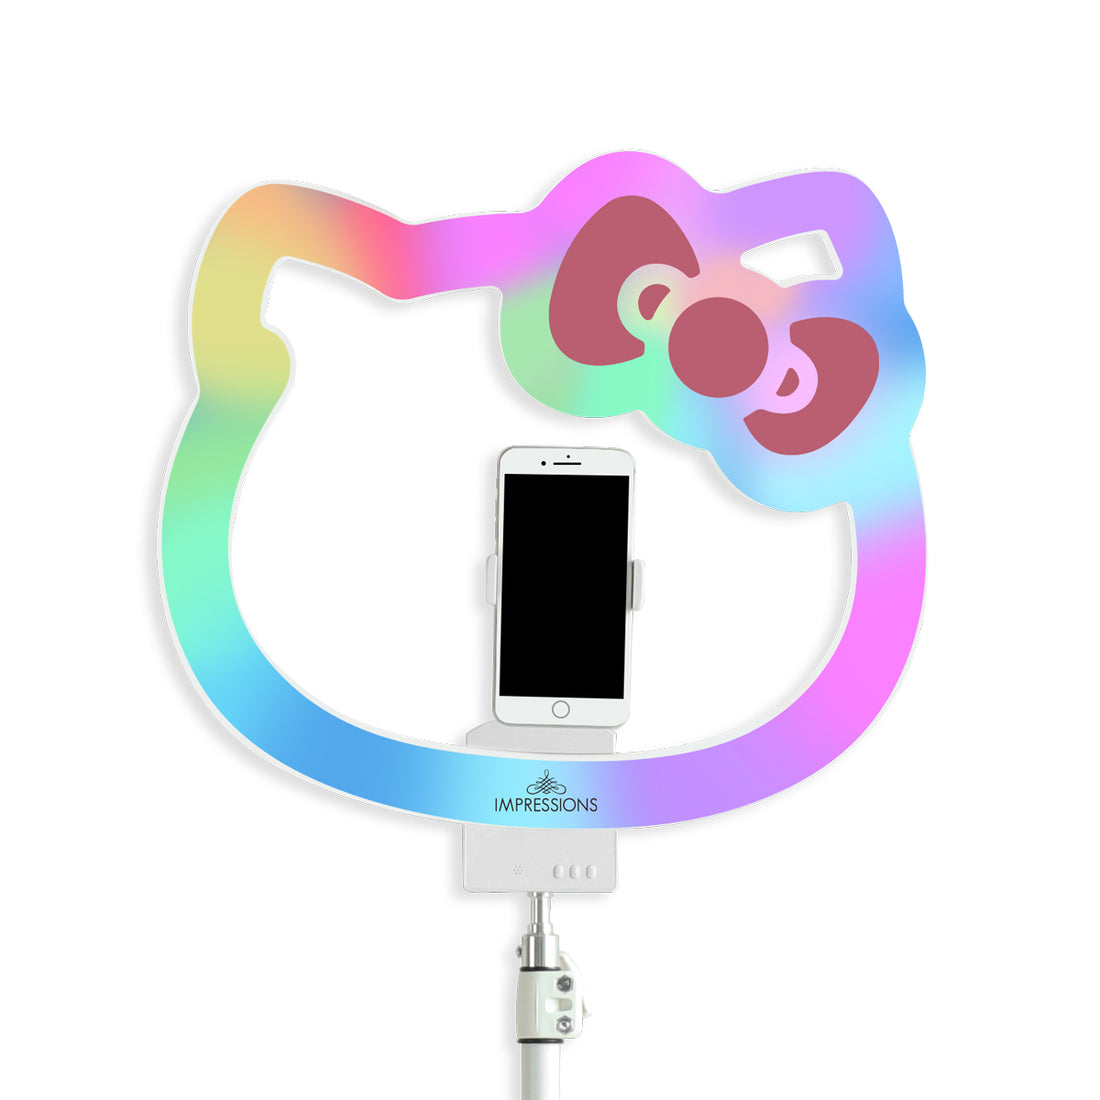 HELLO-KITTY_-18_-RGB-RING-LIGHT-WITH-TRIPOD-FRONT-ZOOM-RAINBOW